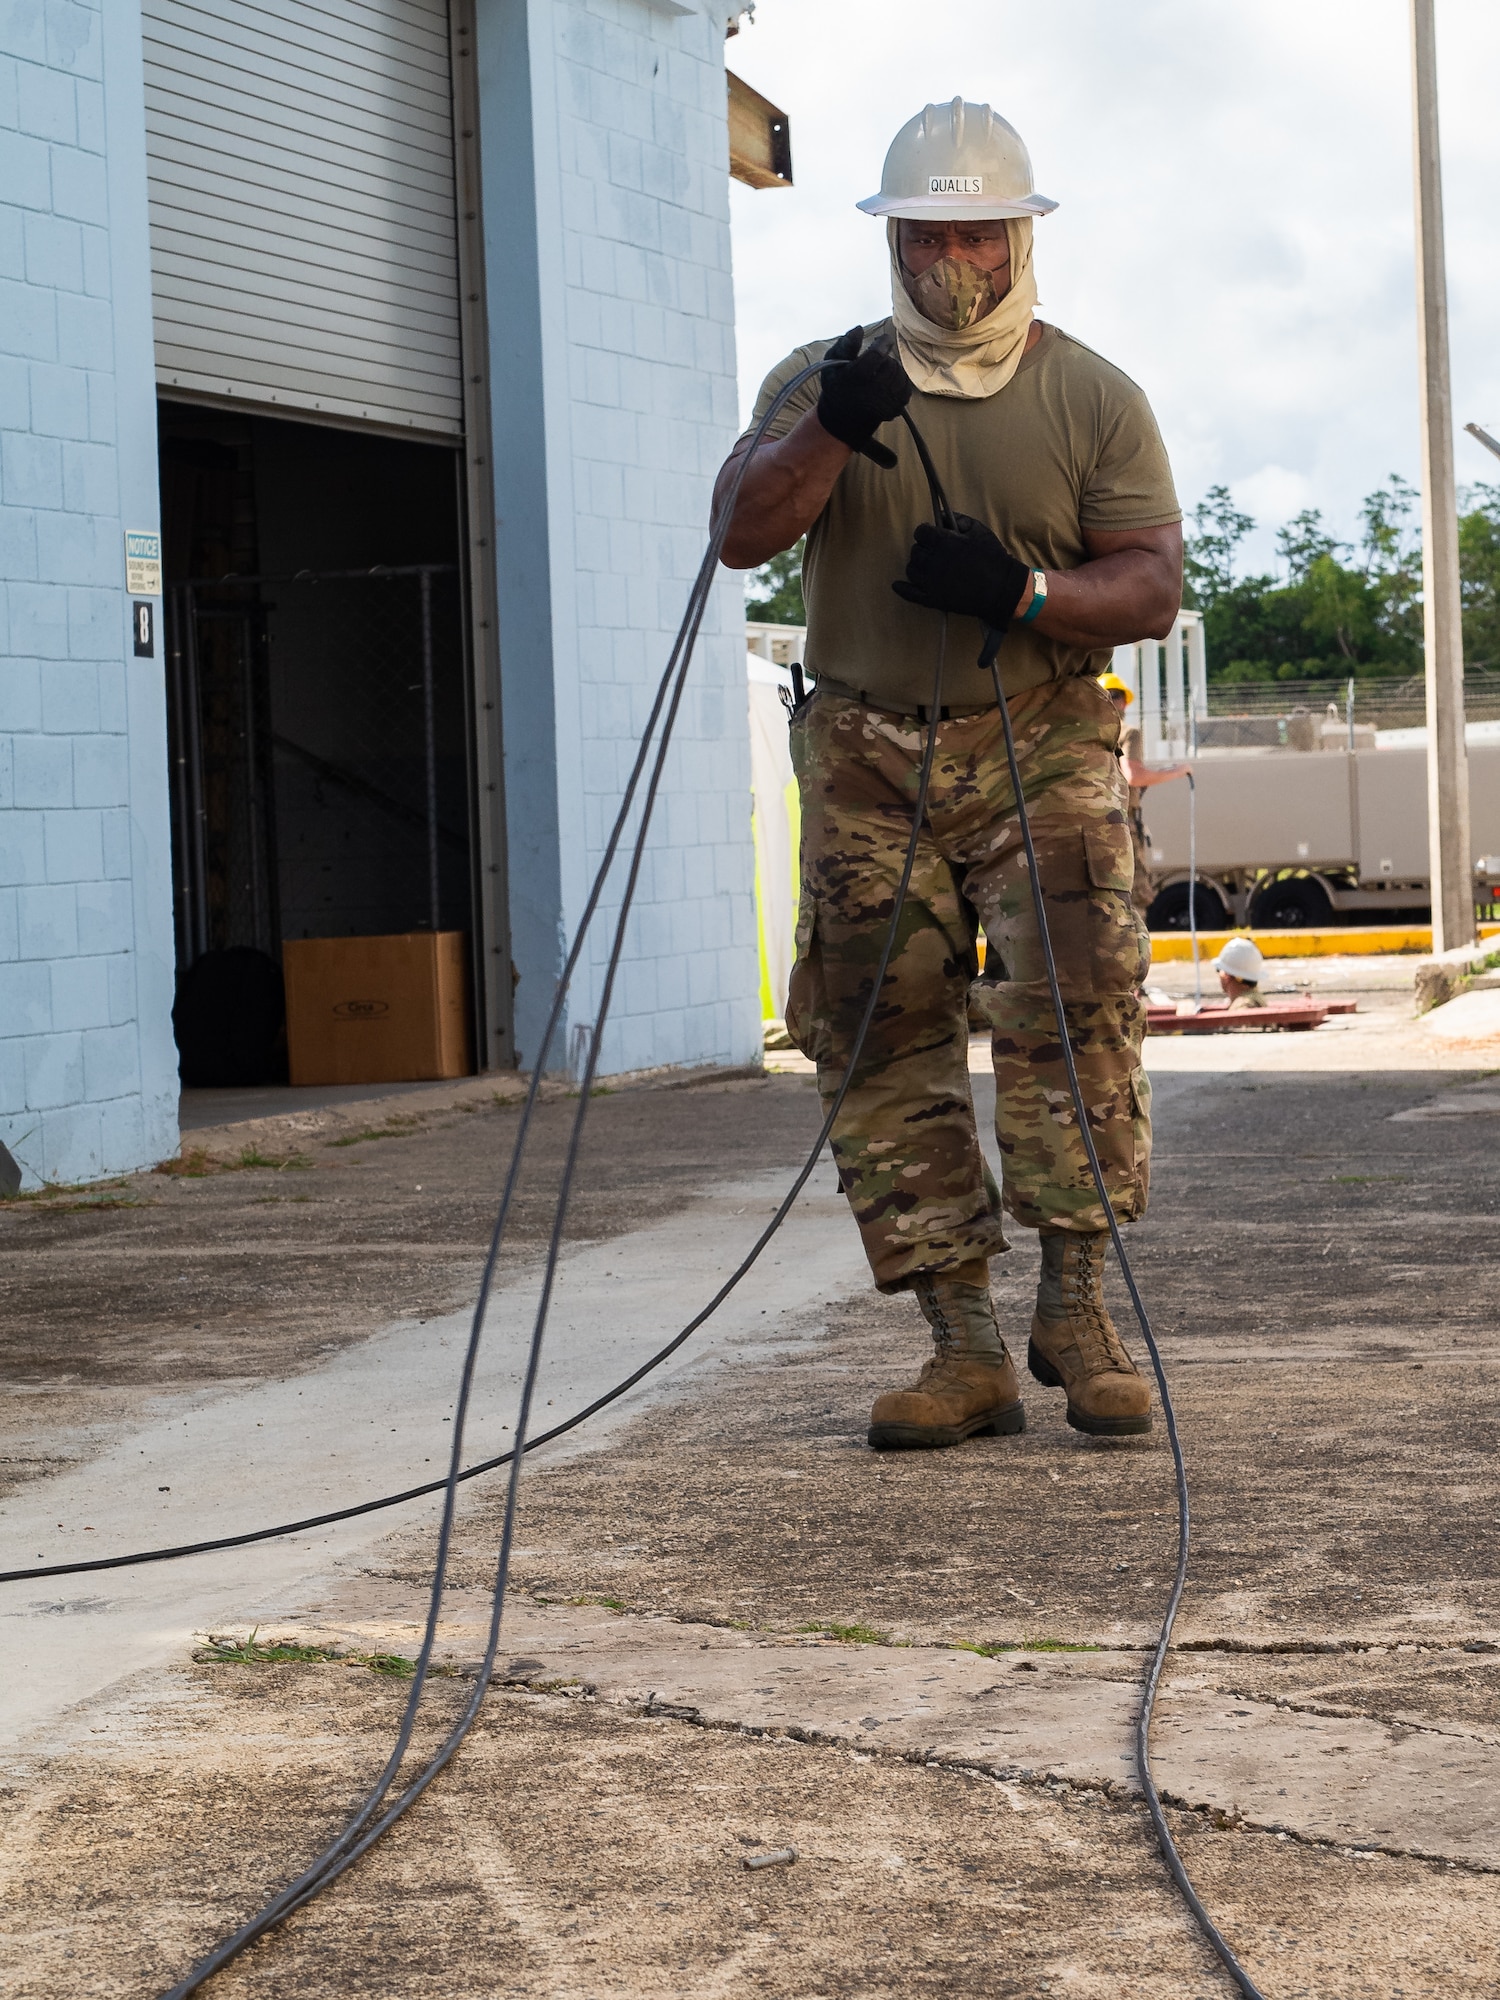 U.S. Air Force Tech. Sgt. Antonio Qualls, cable and antenna technician with the 202d Engineering Installation Squadron (EIS), 116th Air Control Wing, Georgia Air National Guard, prepares fiber optic cables for installation during a large-scale communications infrastructure project at Muñiz Air National Guard Base, Puerto Rico, July 22, 2020. The 202d EIS is leading the project which includes multiple Air National Guard EIS units. The Airmen are relocating multiple communication systems’ cables and equipment to hardened facilities as part of the on-going recovery efforts in response to damage sustained during Hurricanes Irma and Maria. (U.S. Air National Guard photo by Senior Master Sgt. Roger Parsons)